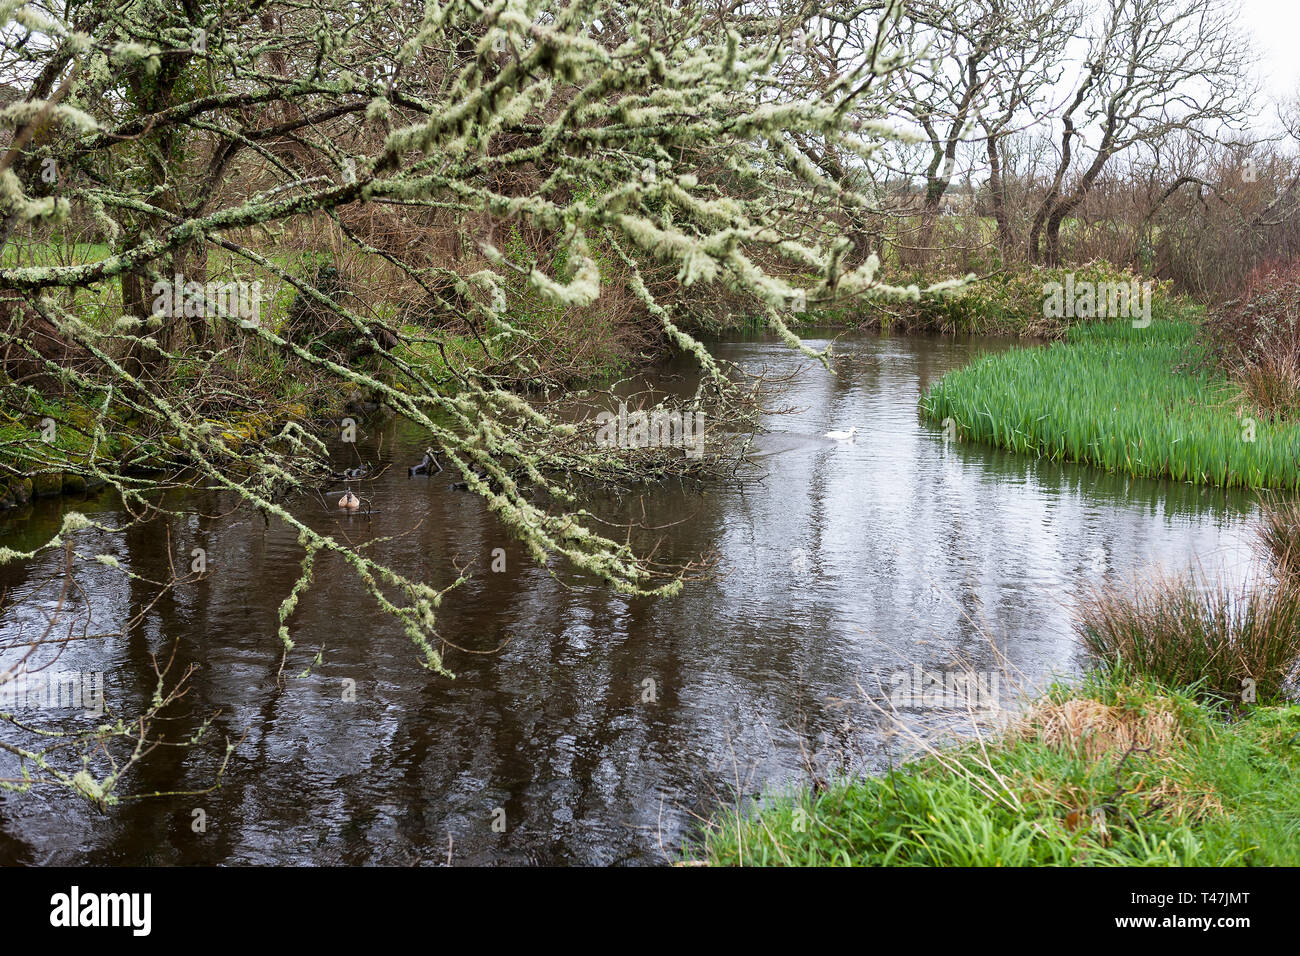 Newford Ponds, Pungies Lane, near Telegraph, St. Mary's, Isles of Scilly, UK Stock Photo